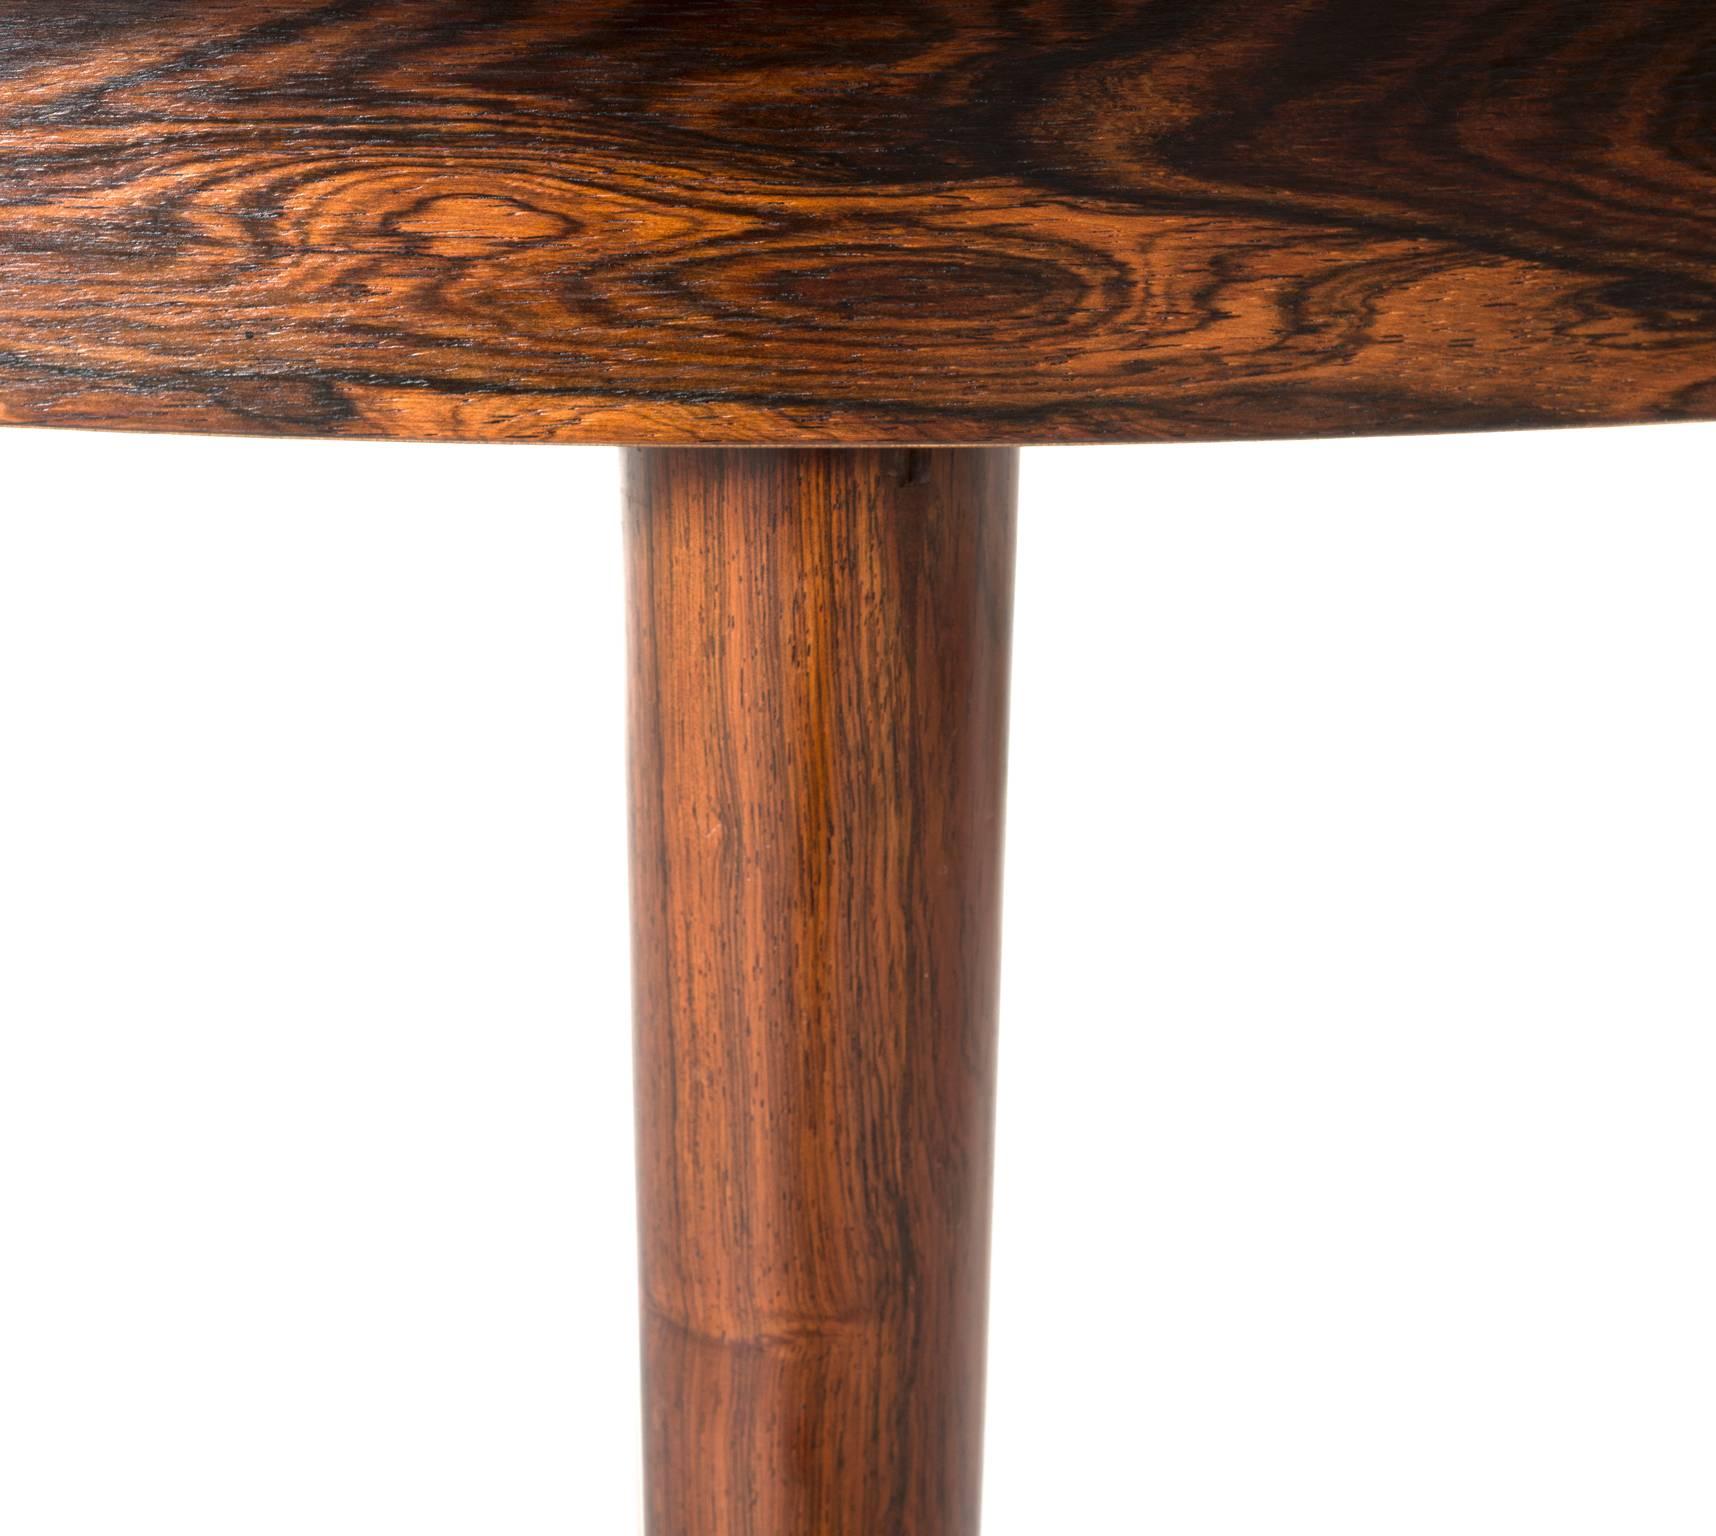 Scandinavian Modern Round Hans Olsen Rosewood Dining Table with Extension Leaf